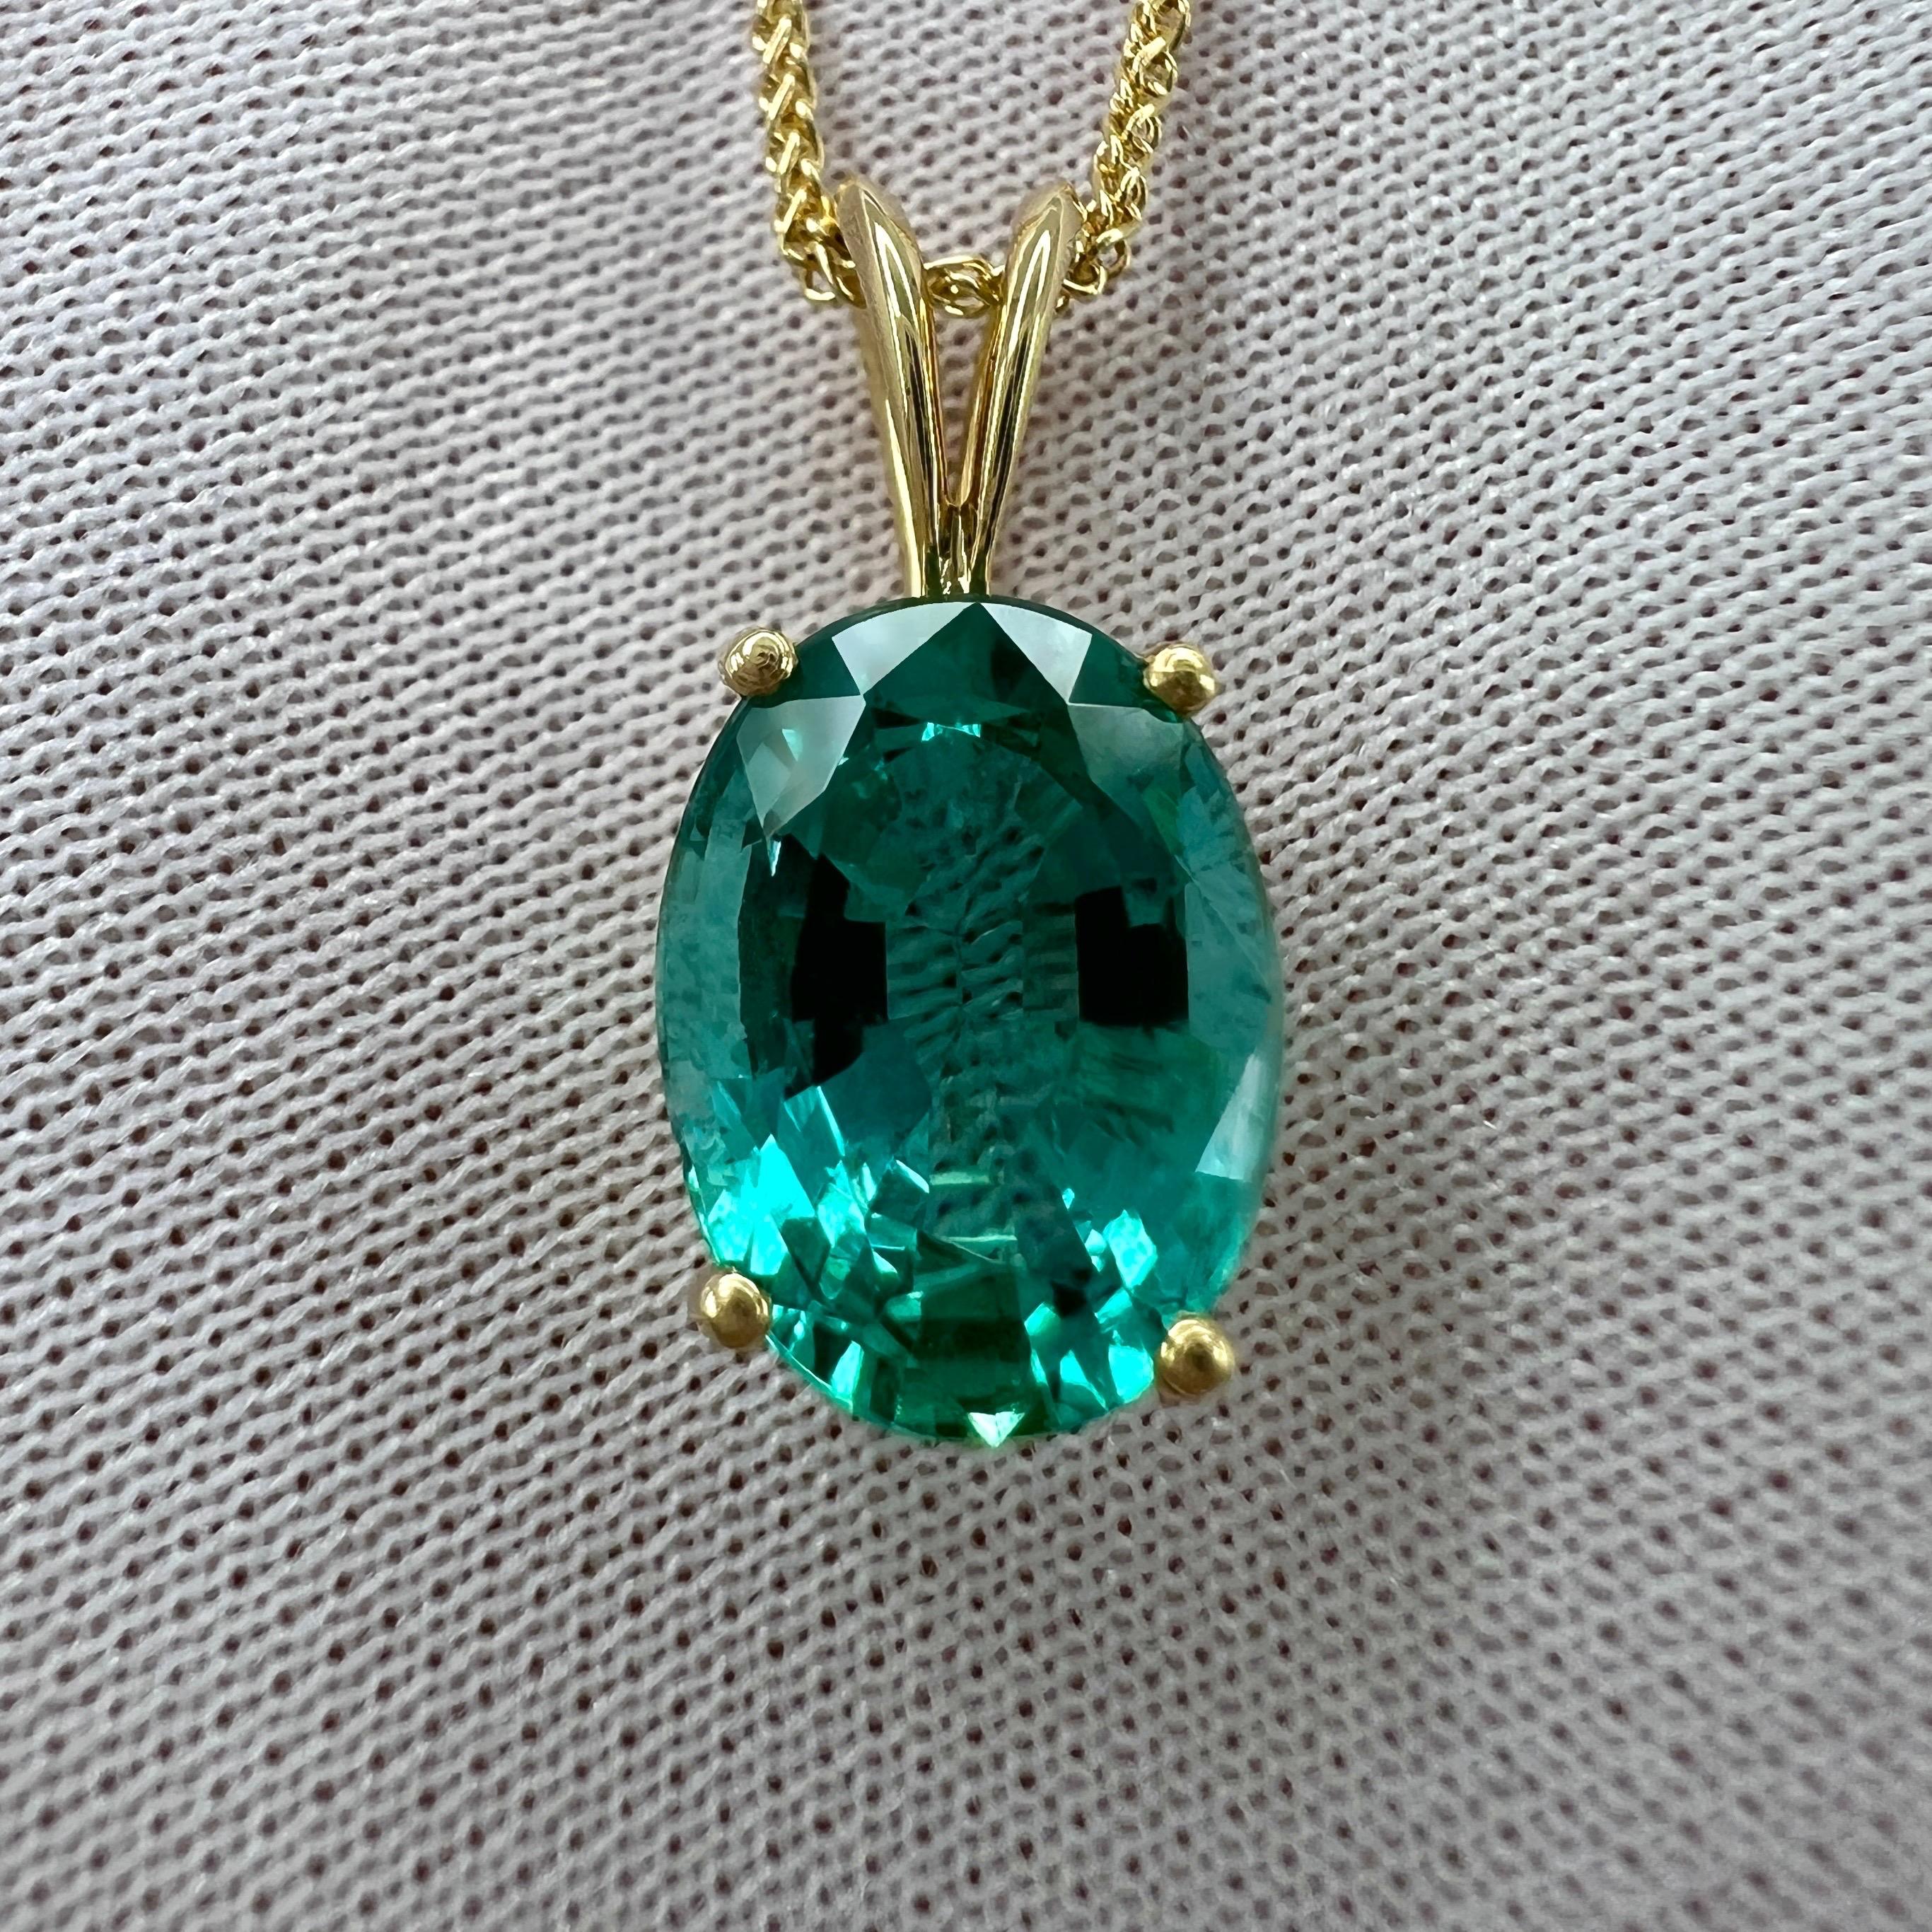 GIA Certified 2.95ct Vivid Blue Green Oval Cut Emerald 18k Gold Pendant Necklace For Sale 2